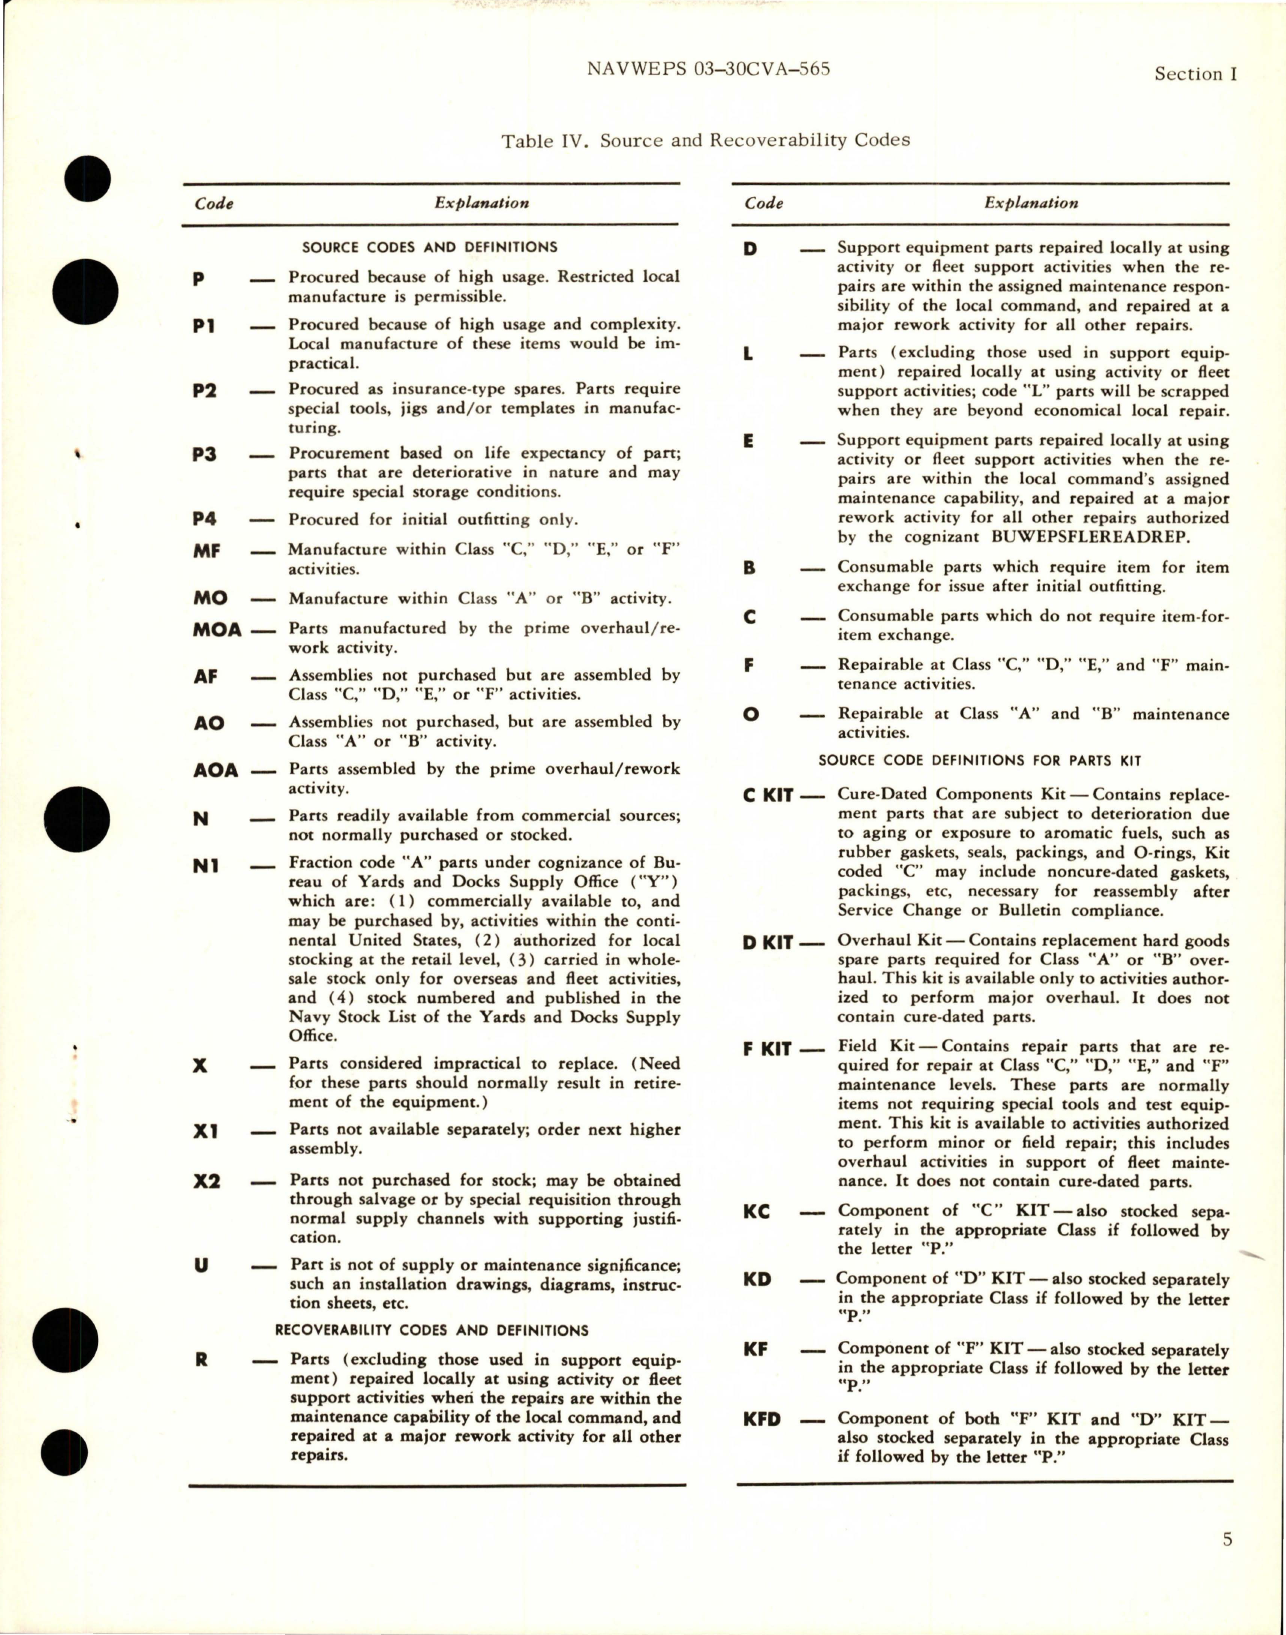 Sample page 7 from AirCorps Library document: Illustrated Parts Breakdown for Aileron and Spoiler Power Control and Cylinder Assemblies, Rigging and Synchronization Fixtures